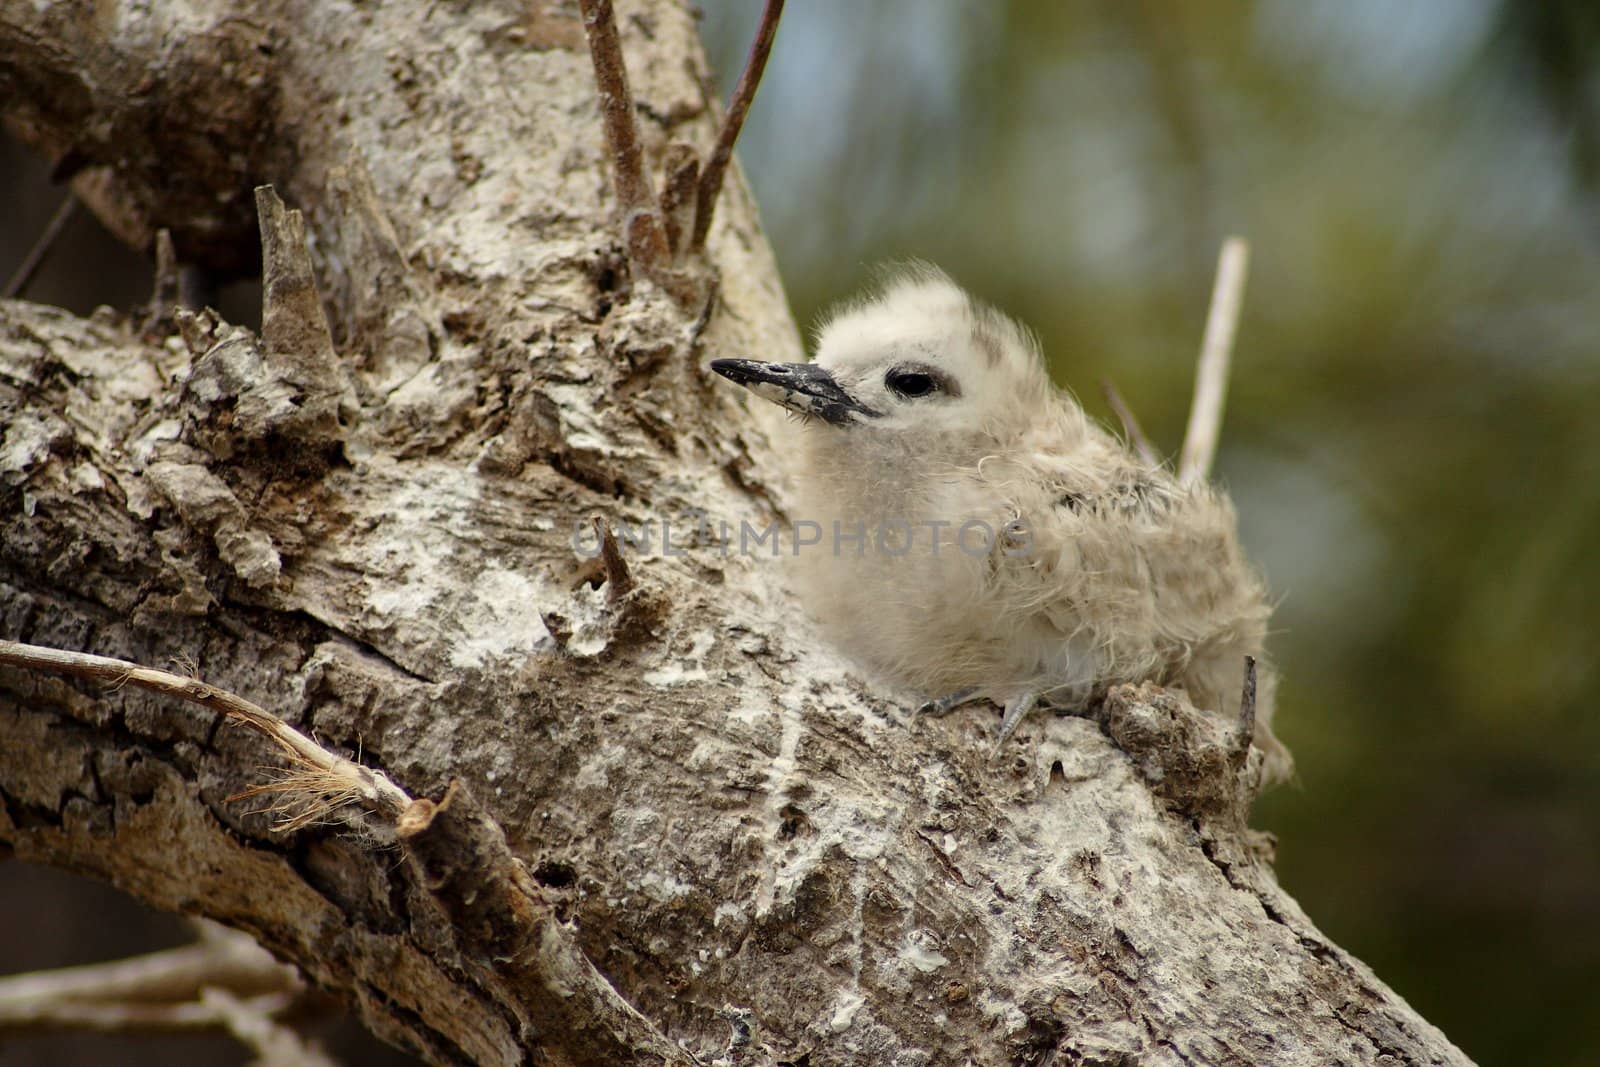 A young bird of the White Frigate Bird (Gygis alba) species resting  on a branch